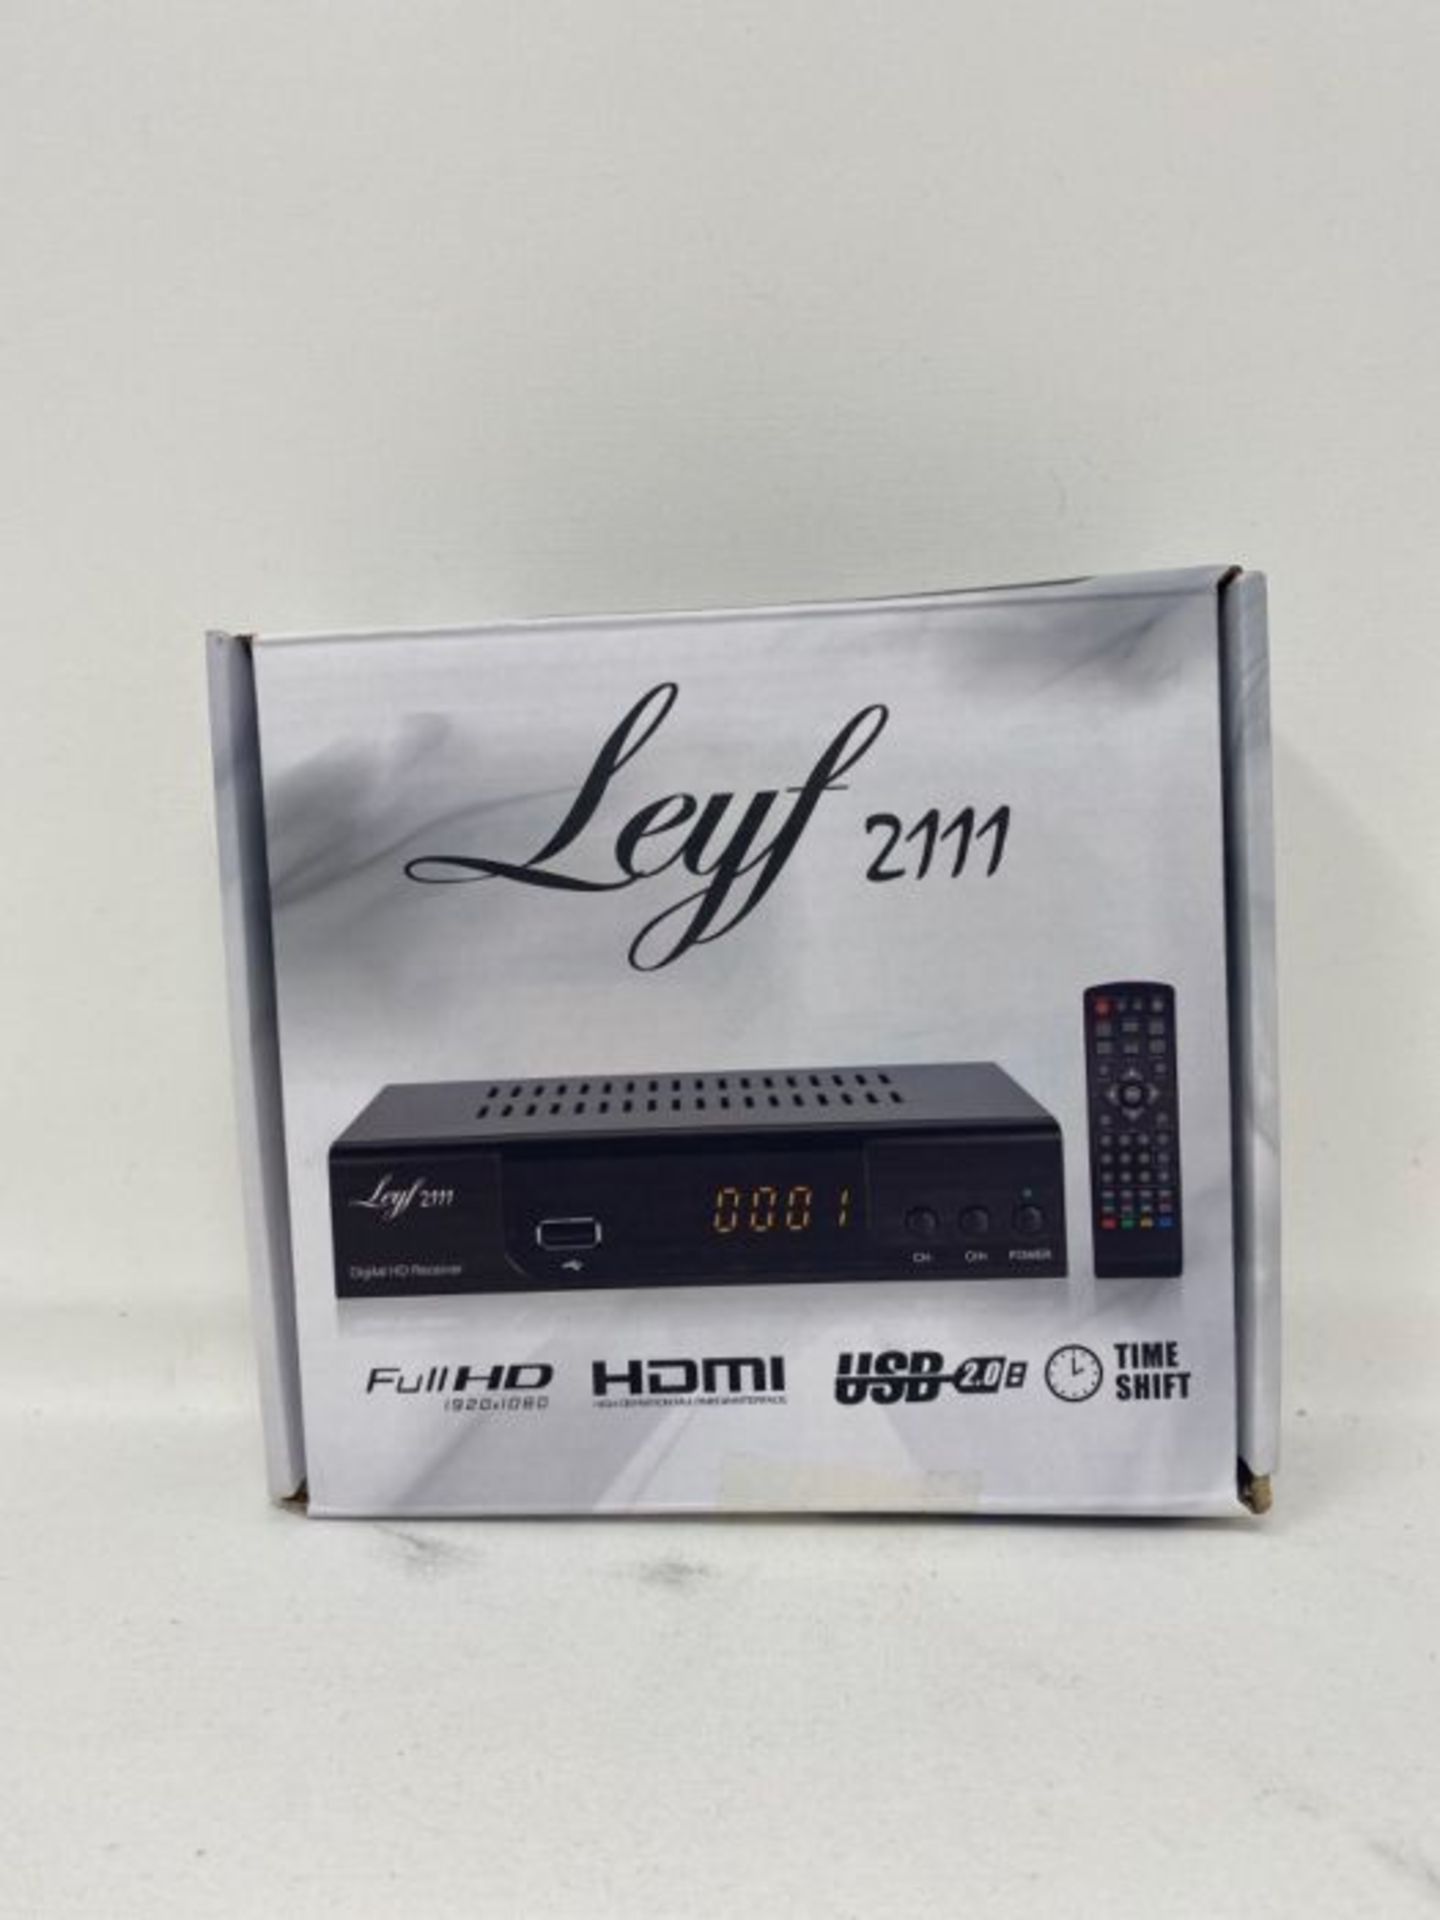 hd-line LEYF2111C Cable Receiver for Digital Cable TV - DVB-C (HDTV, DVB-C / C2, DVB-T - Image 2 of 3